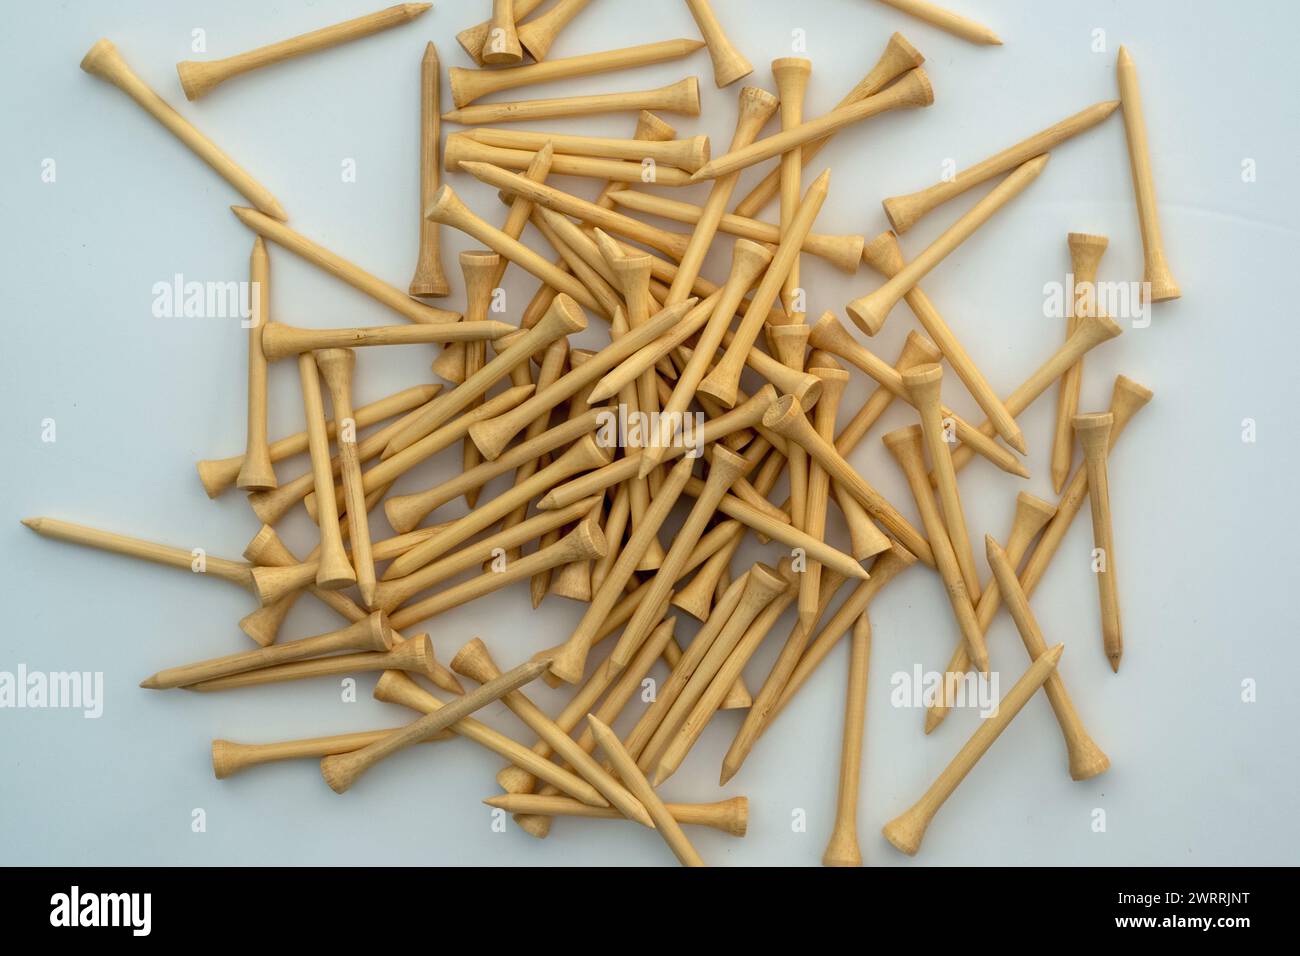 A small pile of natural wood colour bamboo golf tees on a white surface Stock Photo